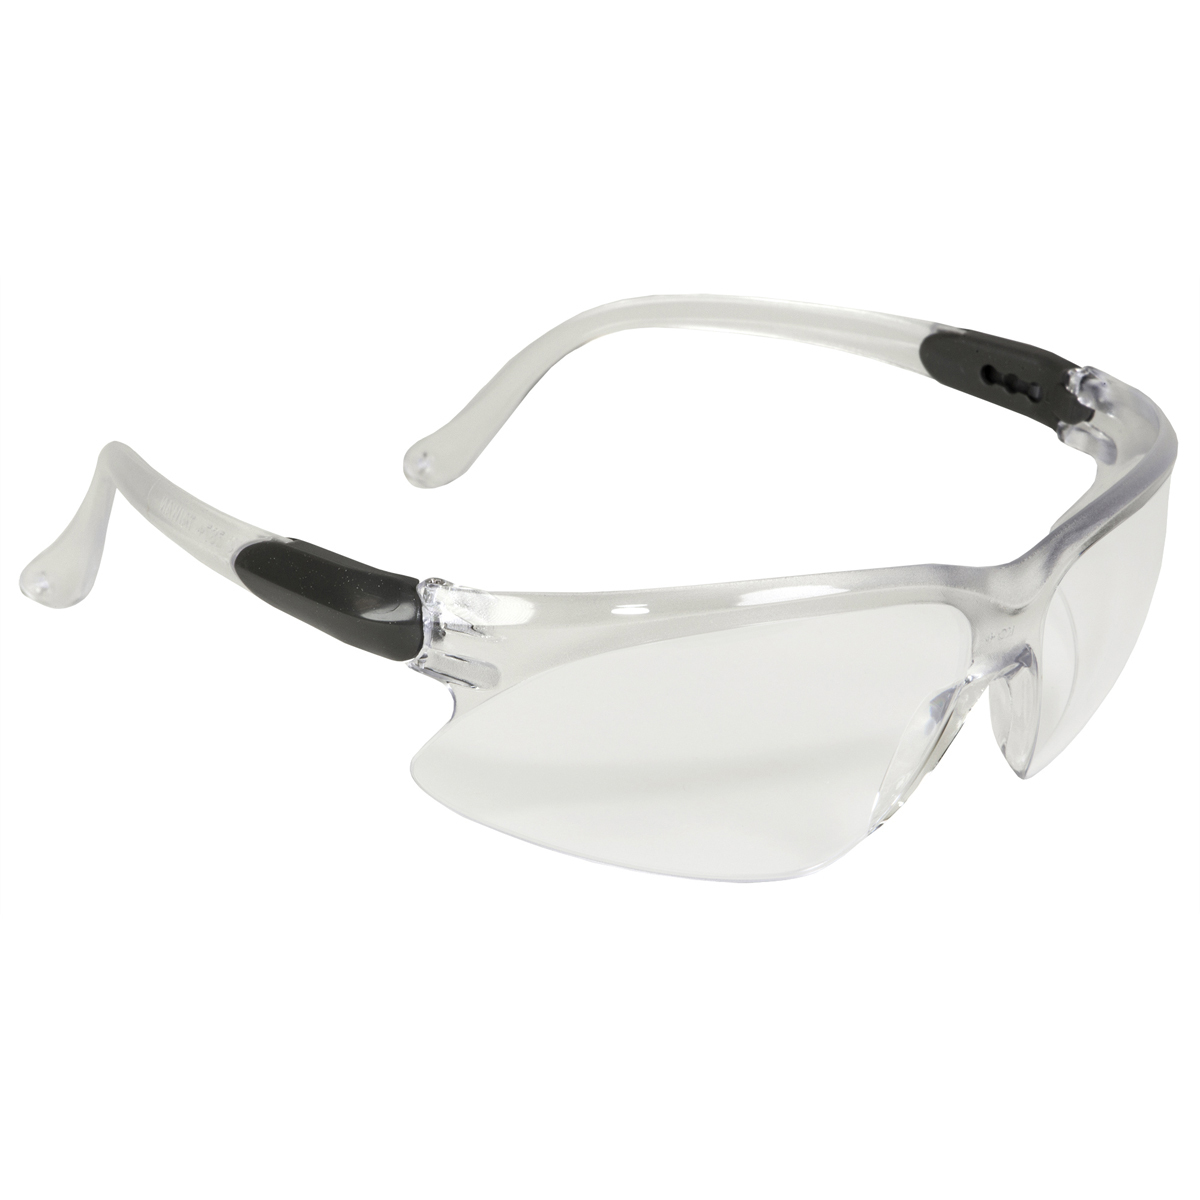 Kimberly-Clark Professional* KleenGuard™ Visio* Silver Safety Glasses With Clear Hard Coat Lens (Availability restrictions apply